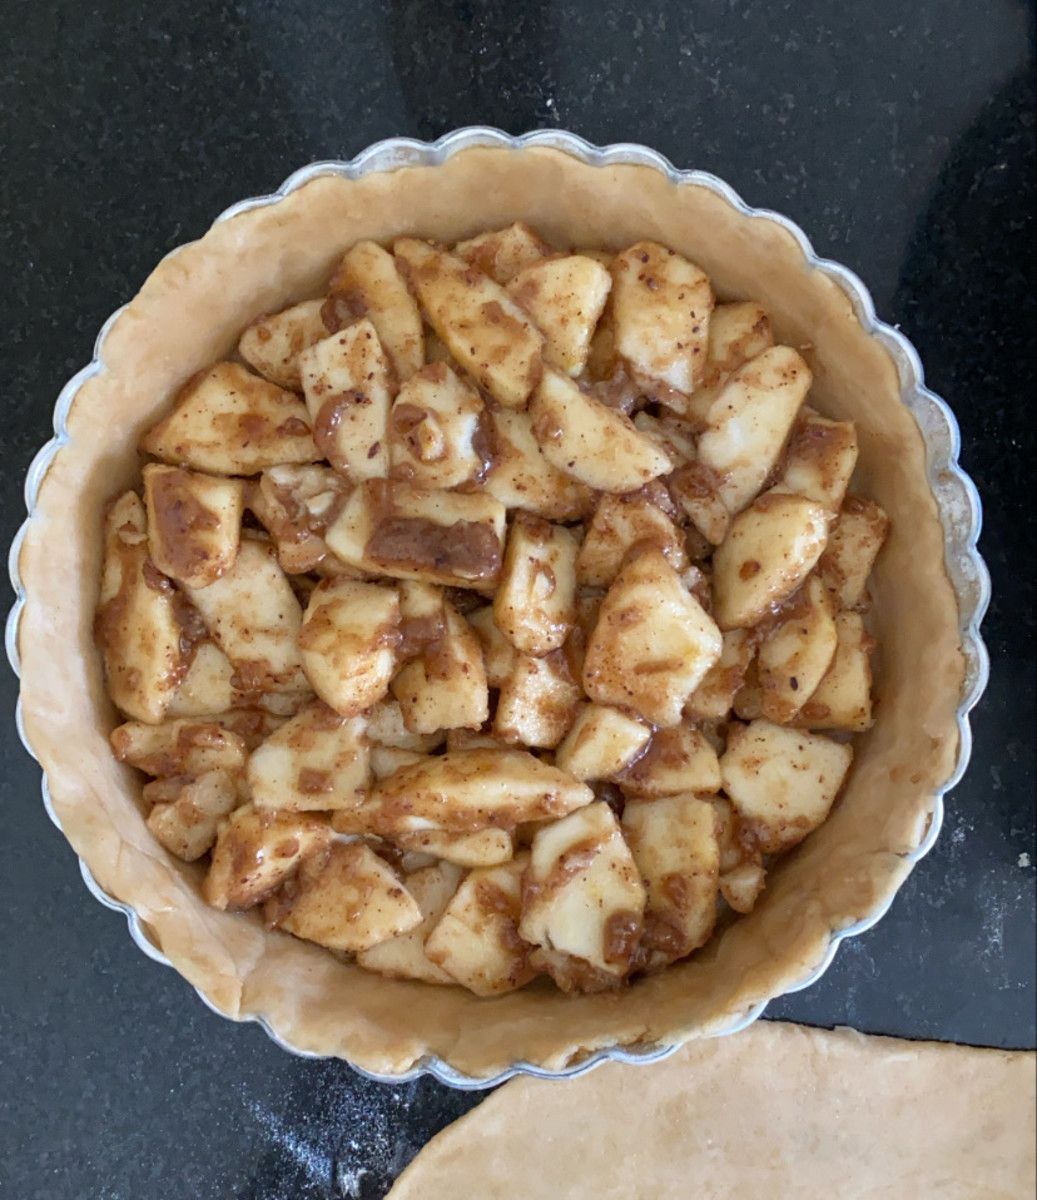 Pie crust filled with coated apple slices